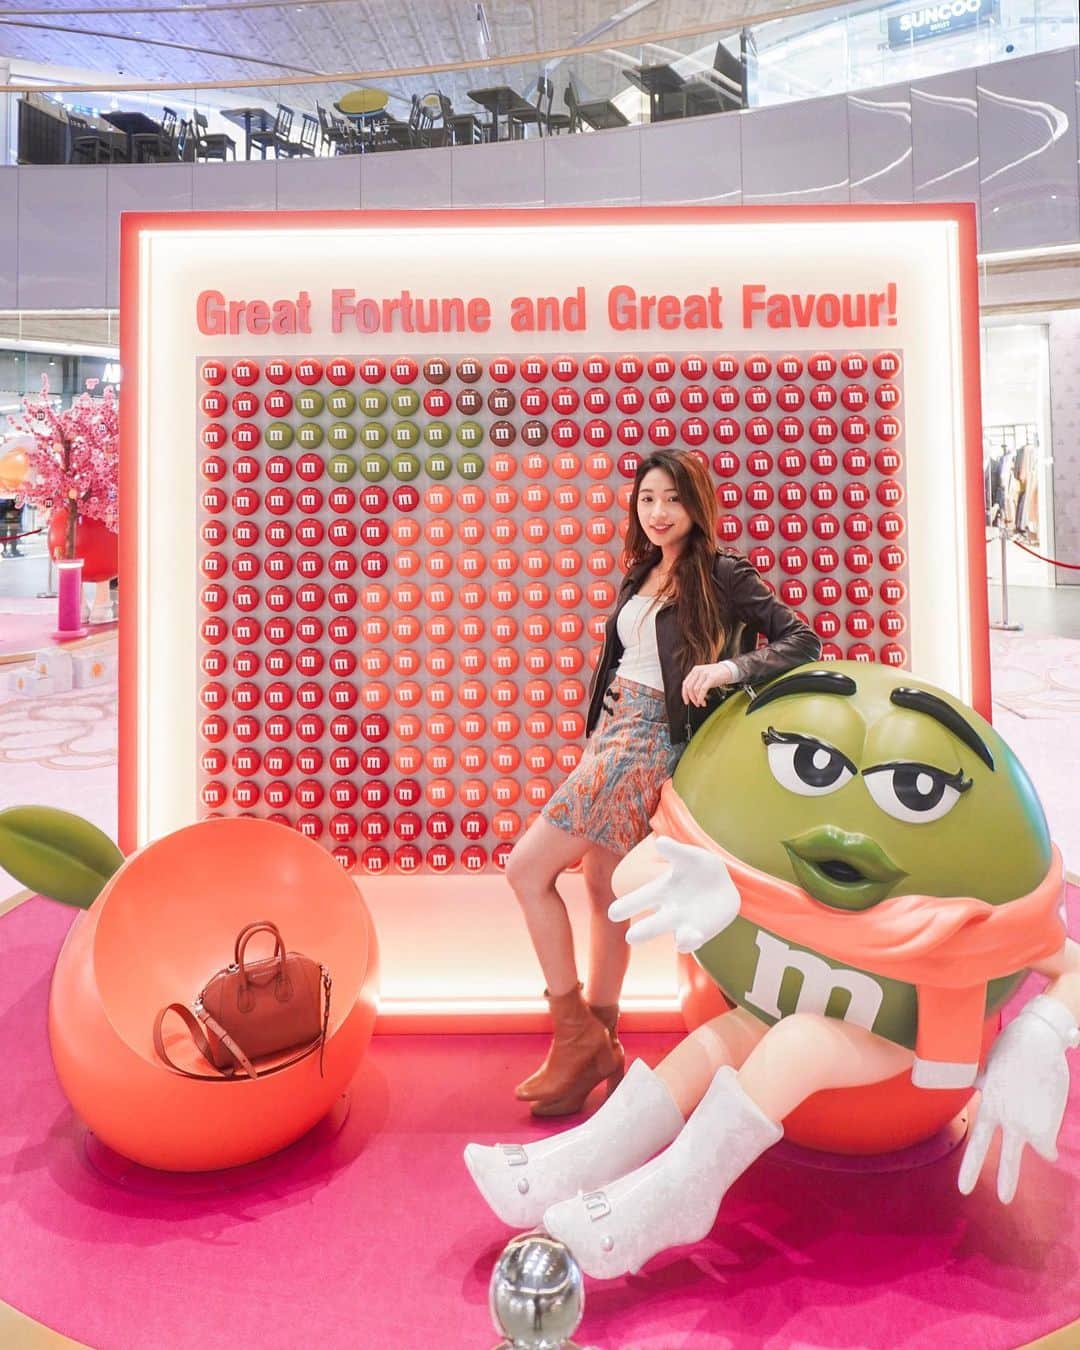 Moanna S.のインスタグラム：「Any fans of M&M characters?🦔  From now till 19th Feb, massive M&M installations is available at Citygate Outlets with AR experiences and DIY WhatsApp stickers!🎊  Swipe right to check out the photo spots!  There’re also limited-edition red packets to celebrate the candy's 80th anniversary, special M&M merch and more! Get yours now by spending at the mall!🧧  @CitygateOutlets #CitygateOutlets #東薈城名店倉 #利是豆來 #豆趣新春遊樂園 # TheSweetTasteofGoodLuck #BeanFunSpringWonderland #CLUBCG #漂亮出走 #EscapeInStyle #M&M'sHongKong」